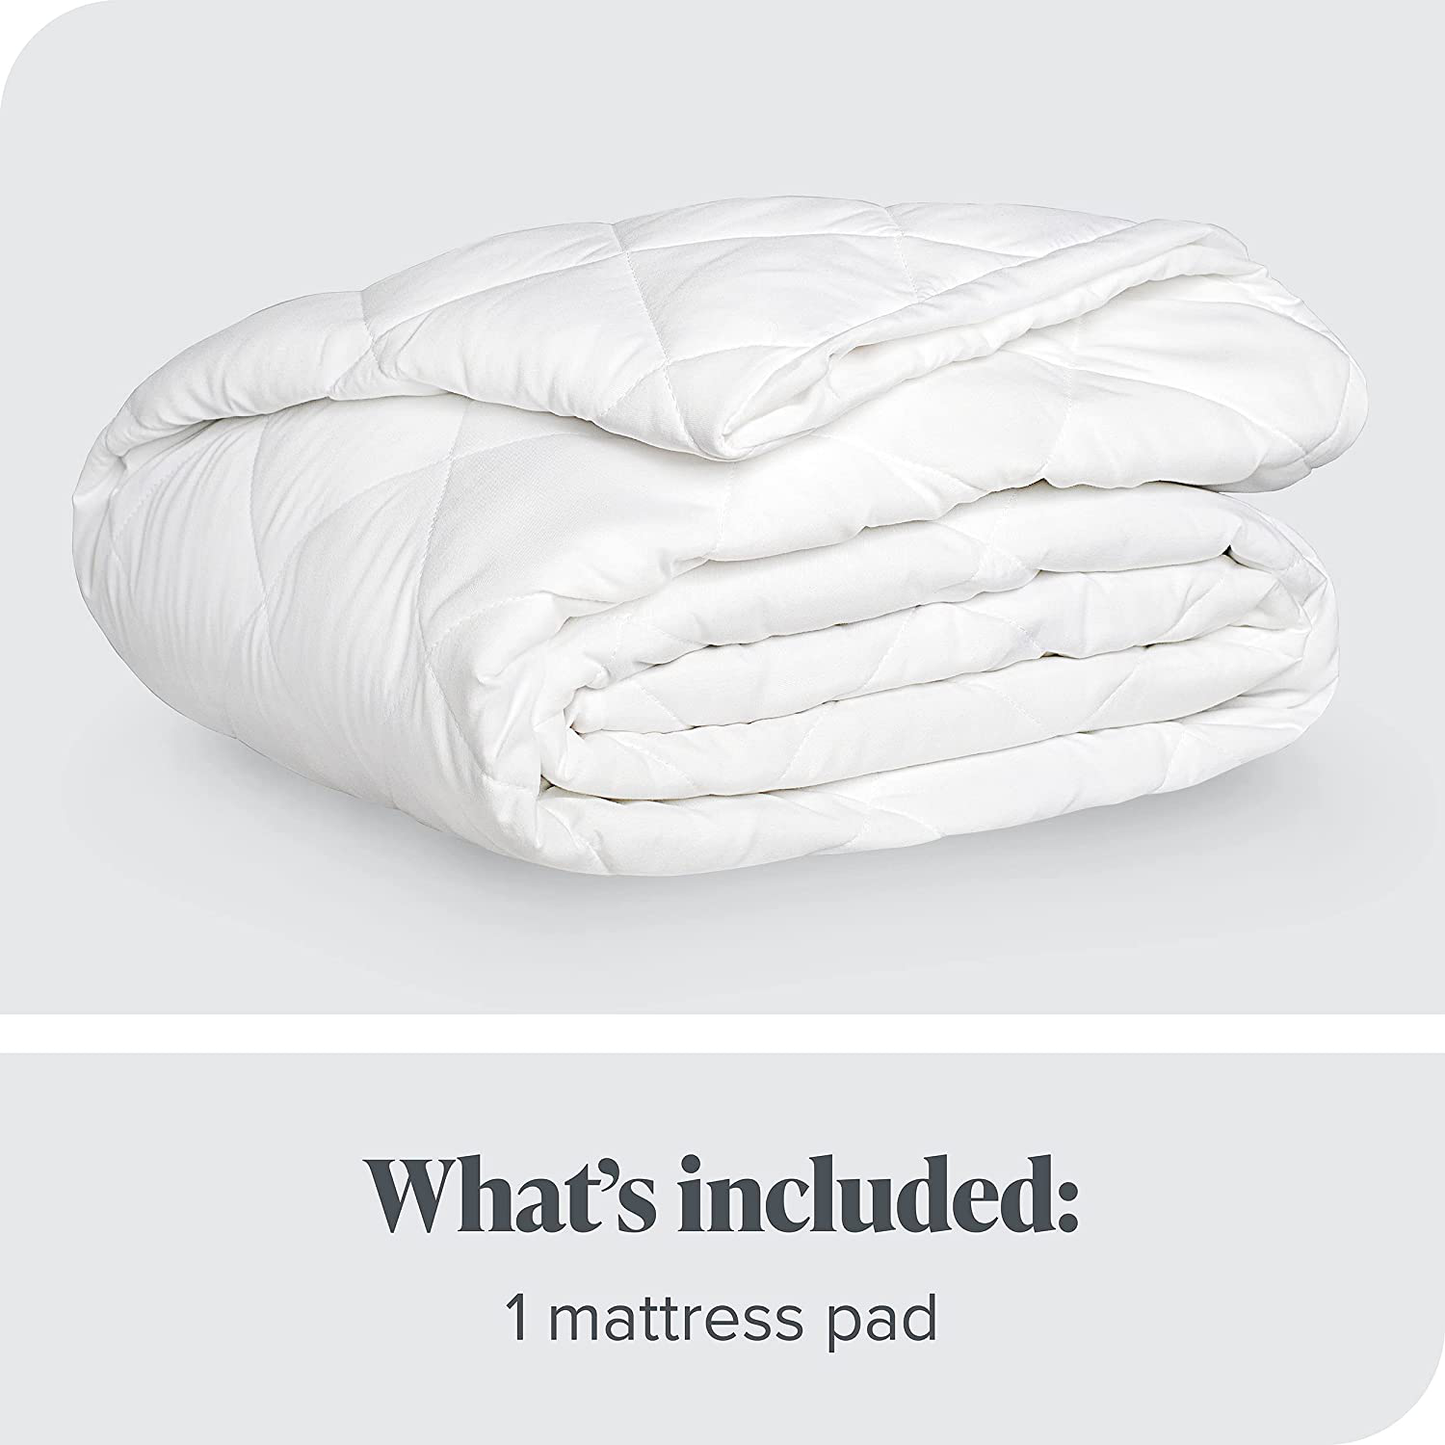 Bare Home Quilted Fitted Mattress Pad (Twin) - Cooling Mattress Topper - Easily Washable - Elastic Fitted Mattress Cover - Stretch-to-Fit up to 15 Inches Deep (Twin)